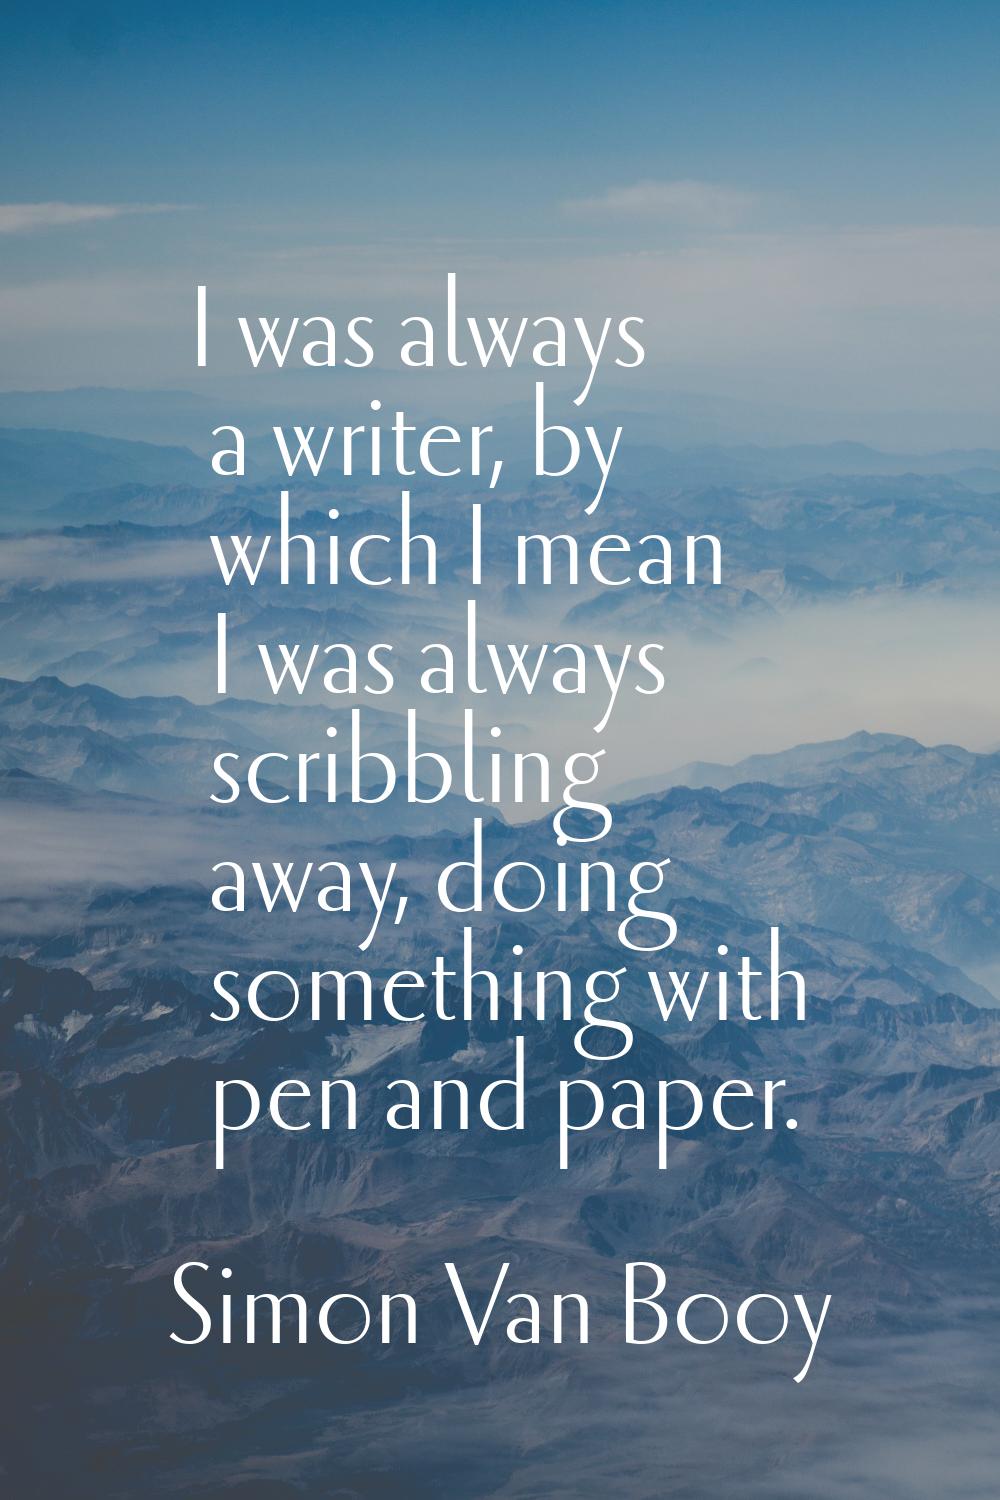 I was always a writer, by which I mean I was always scribbling away, doing something with pen and p